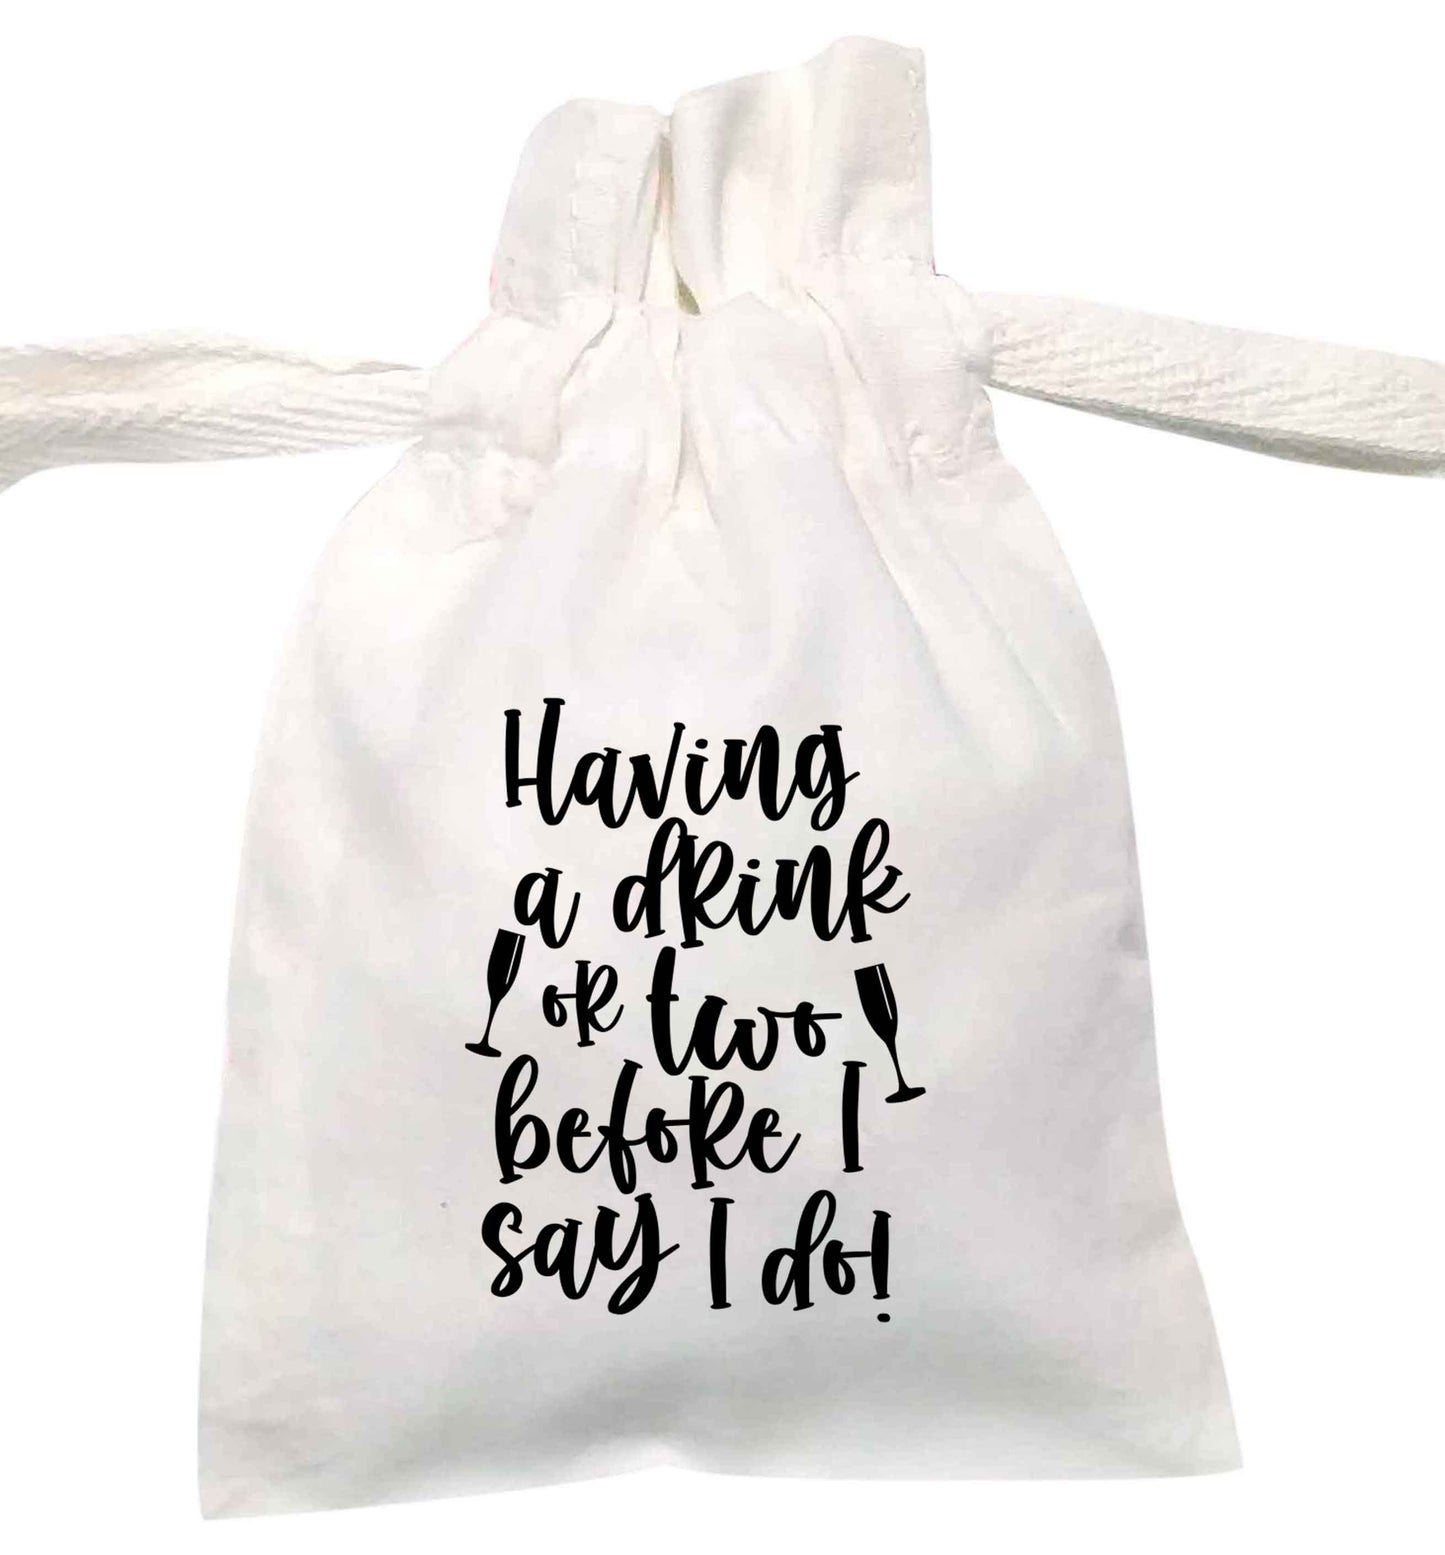 Having a drink or two before I say I do | XS - L | Pouch / Drawstring bag / Sack | Organic Cotton | Bulk discounts available!